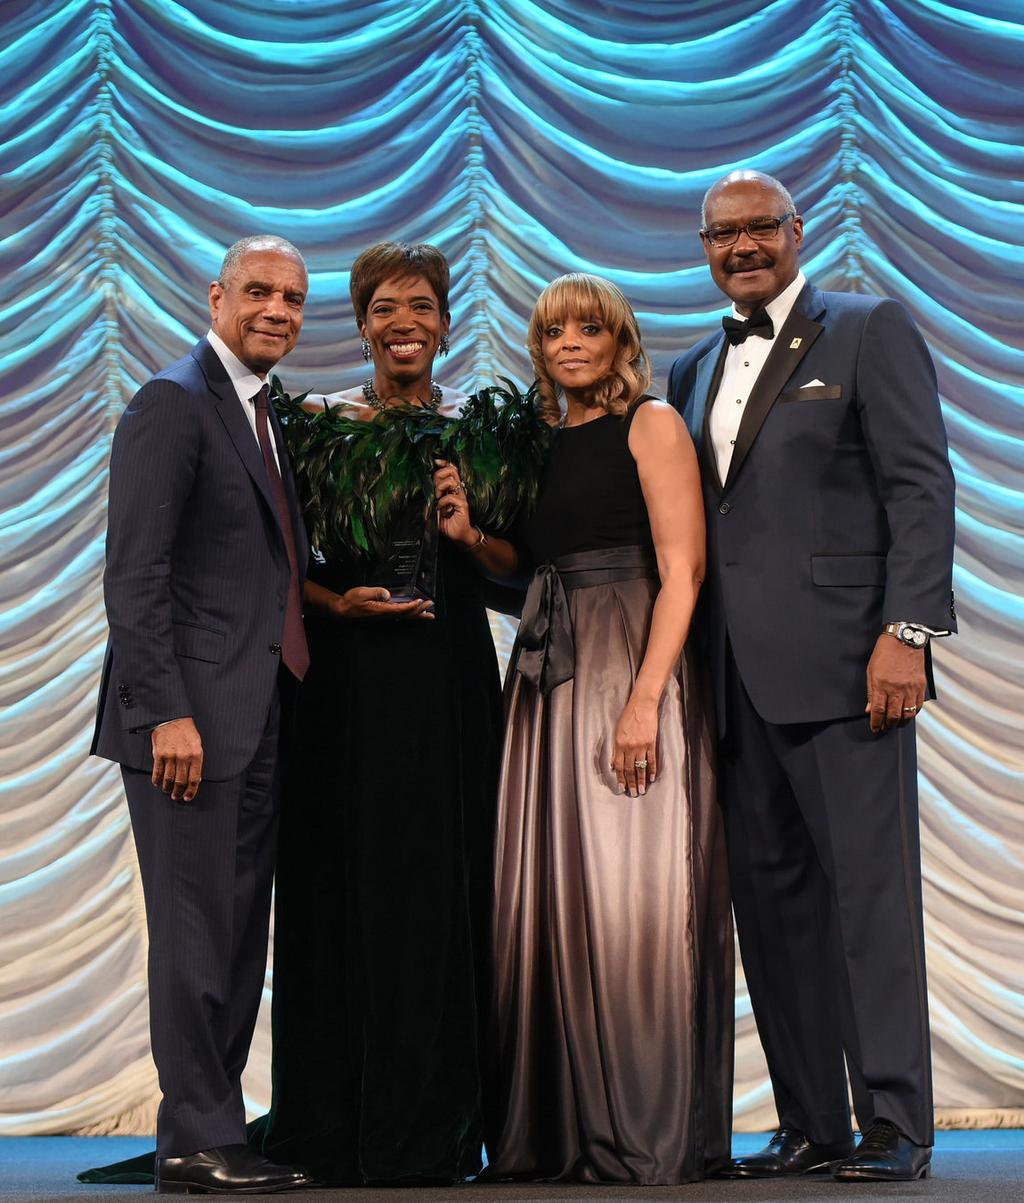 2018 RECOGNITION GALA OVERVIEW AUDIENCE Attendees include top CEOs and senior executives from Fortune 500 companies, industry influencers, thought-leaders, elected officials, entertainers and